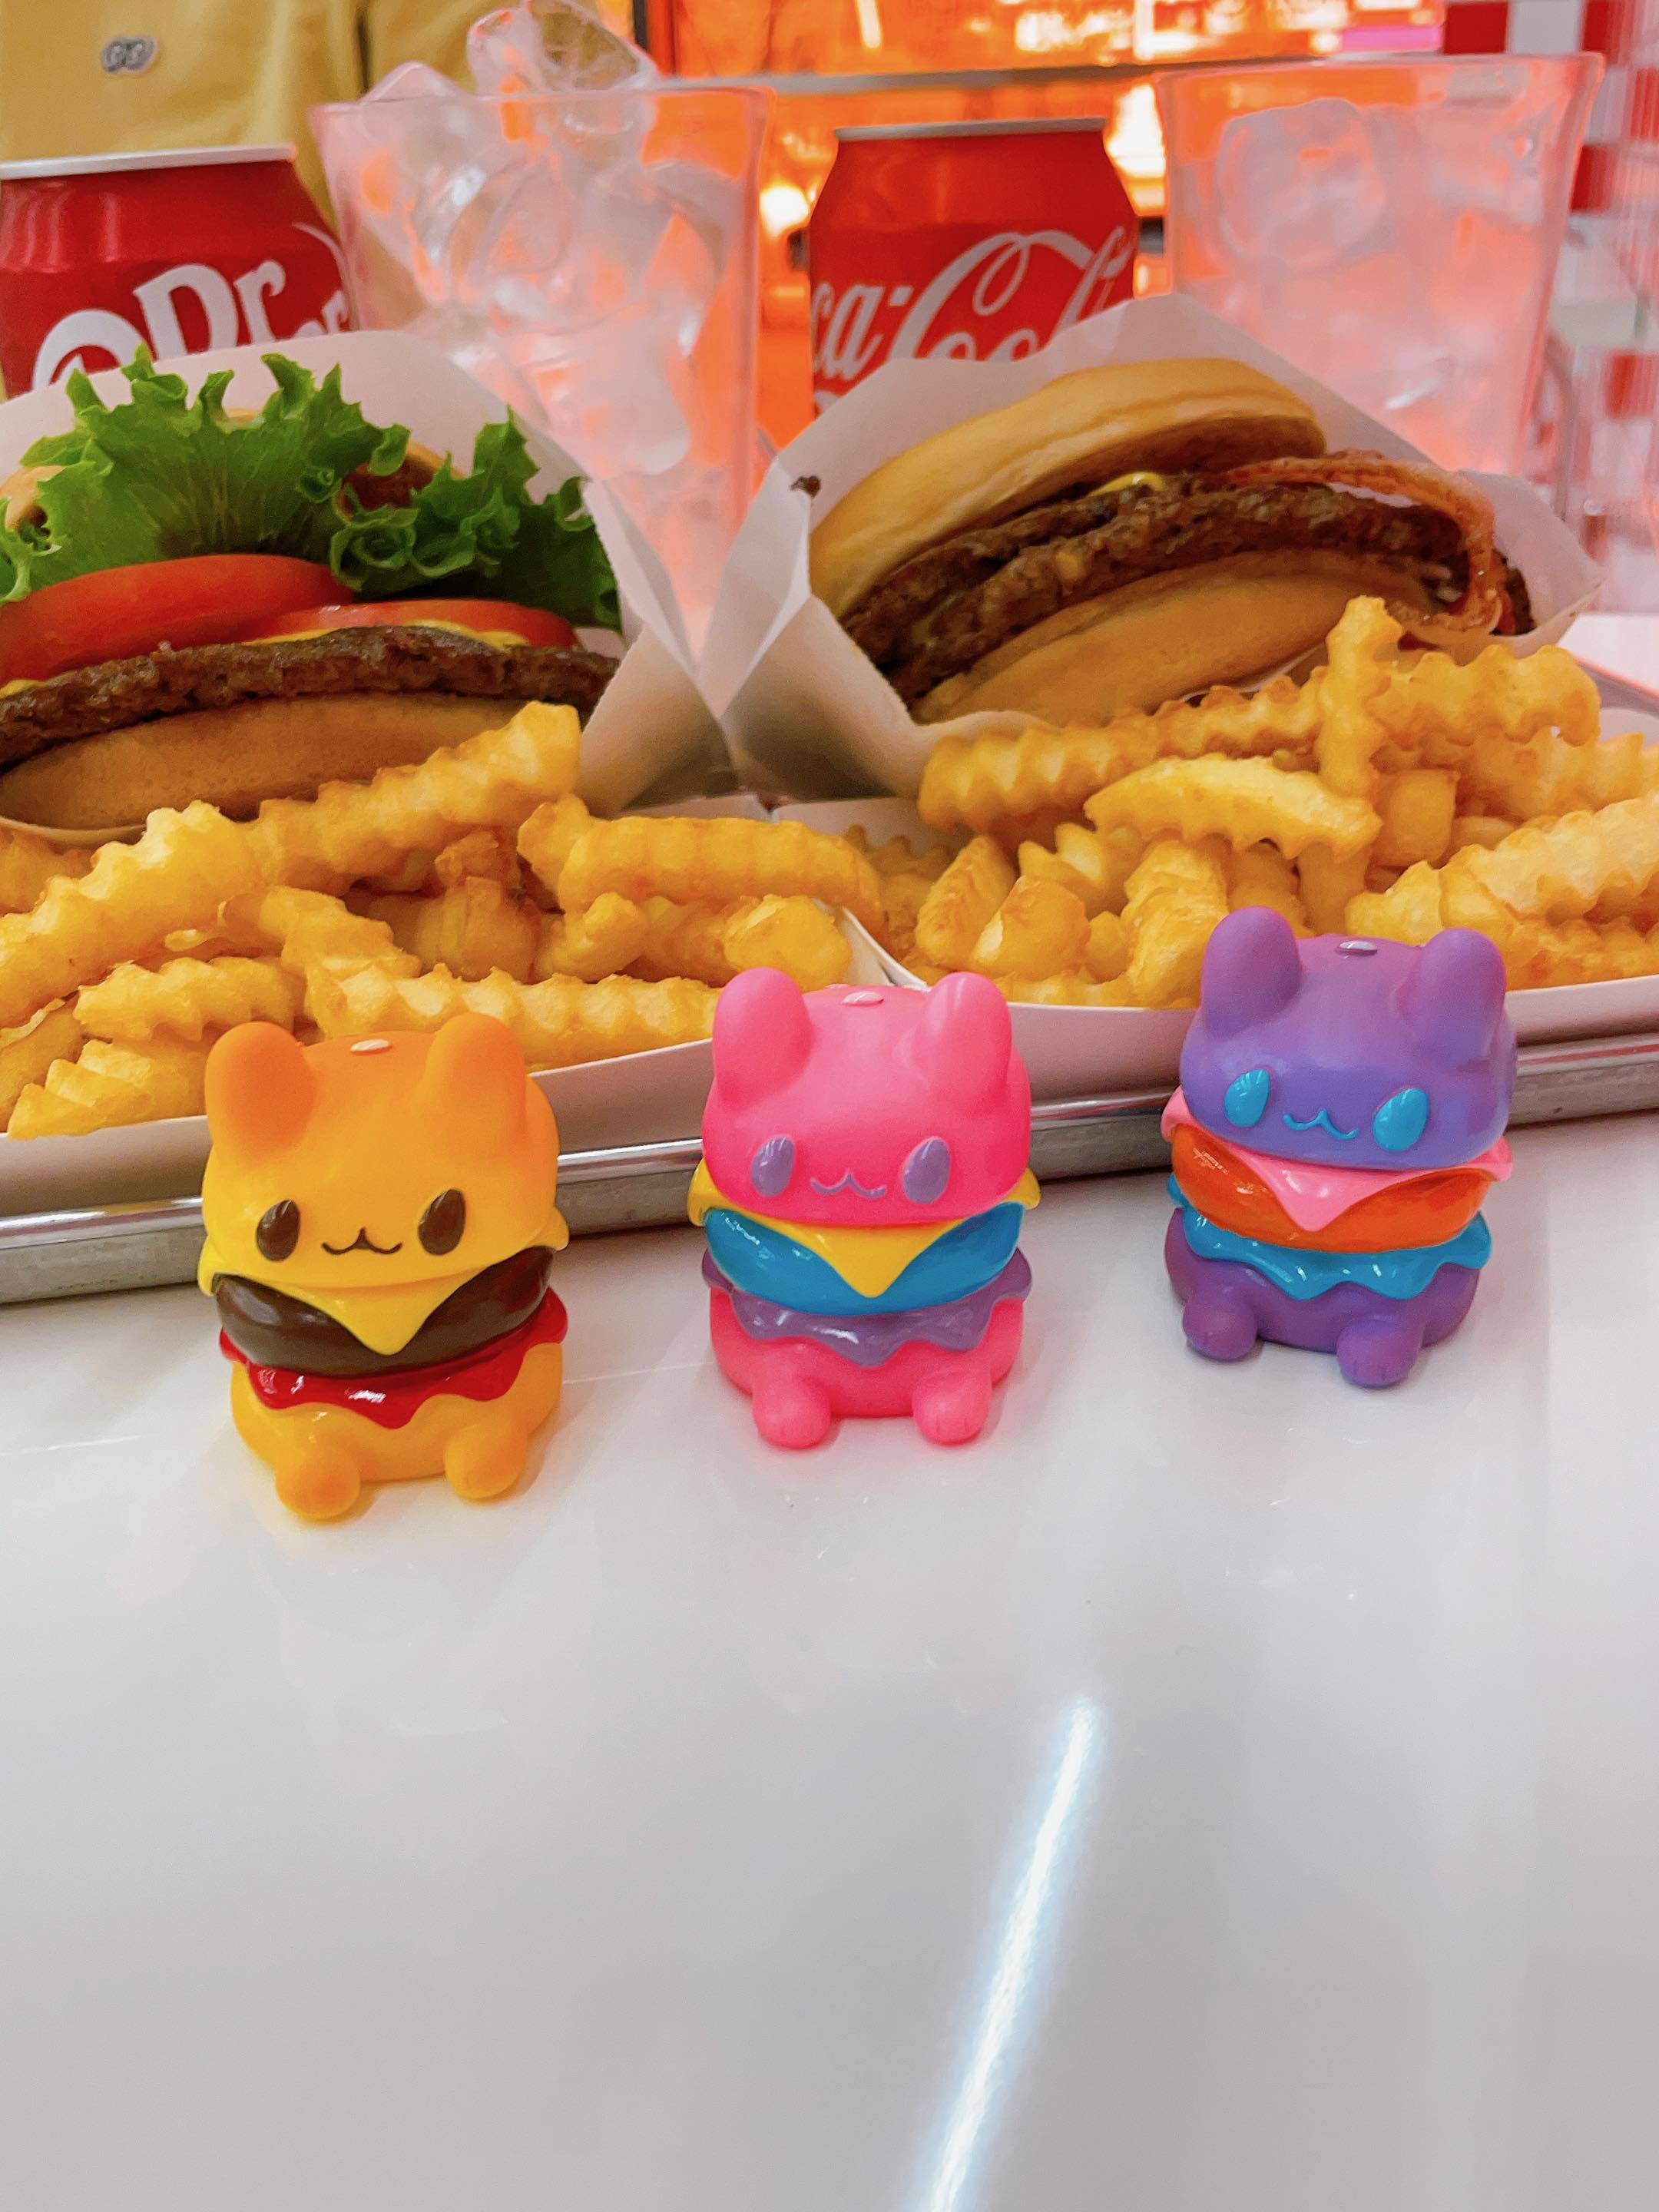 Baby Burgercat by Rato Kim surrounded by fast food toys and snacks on a plate.